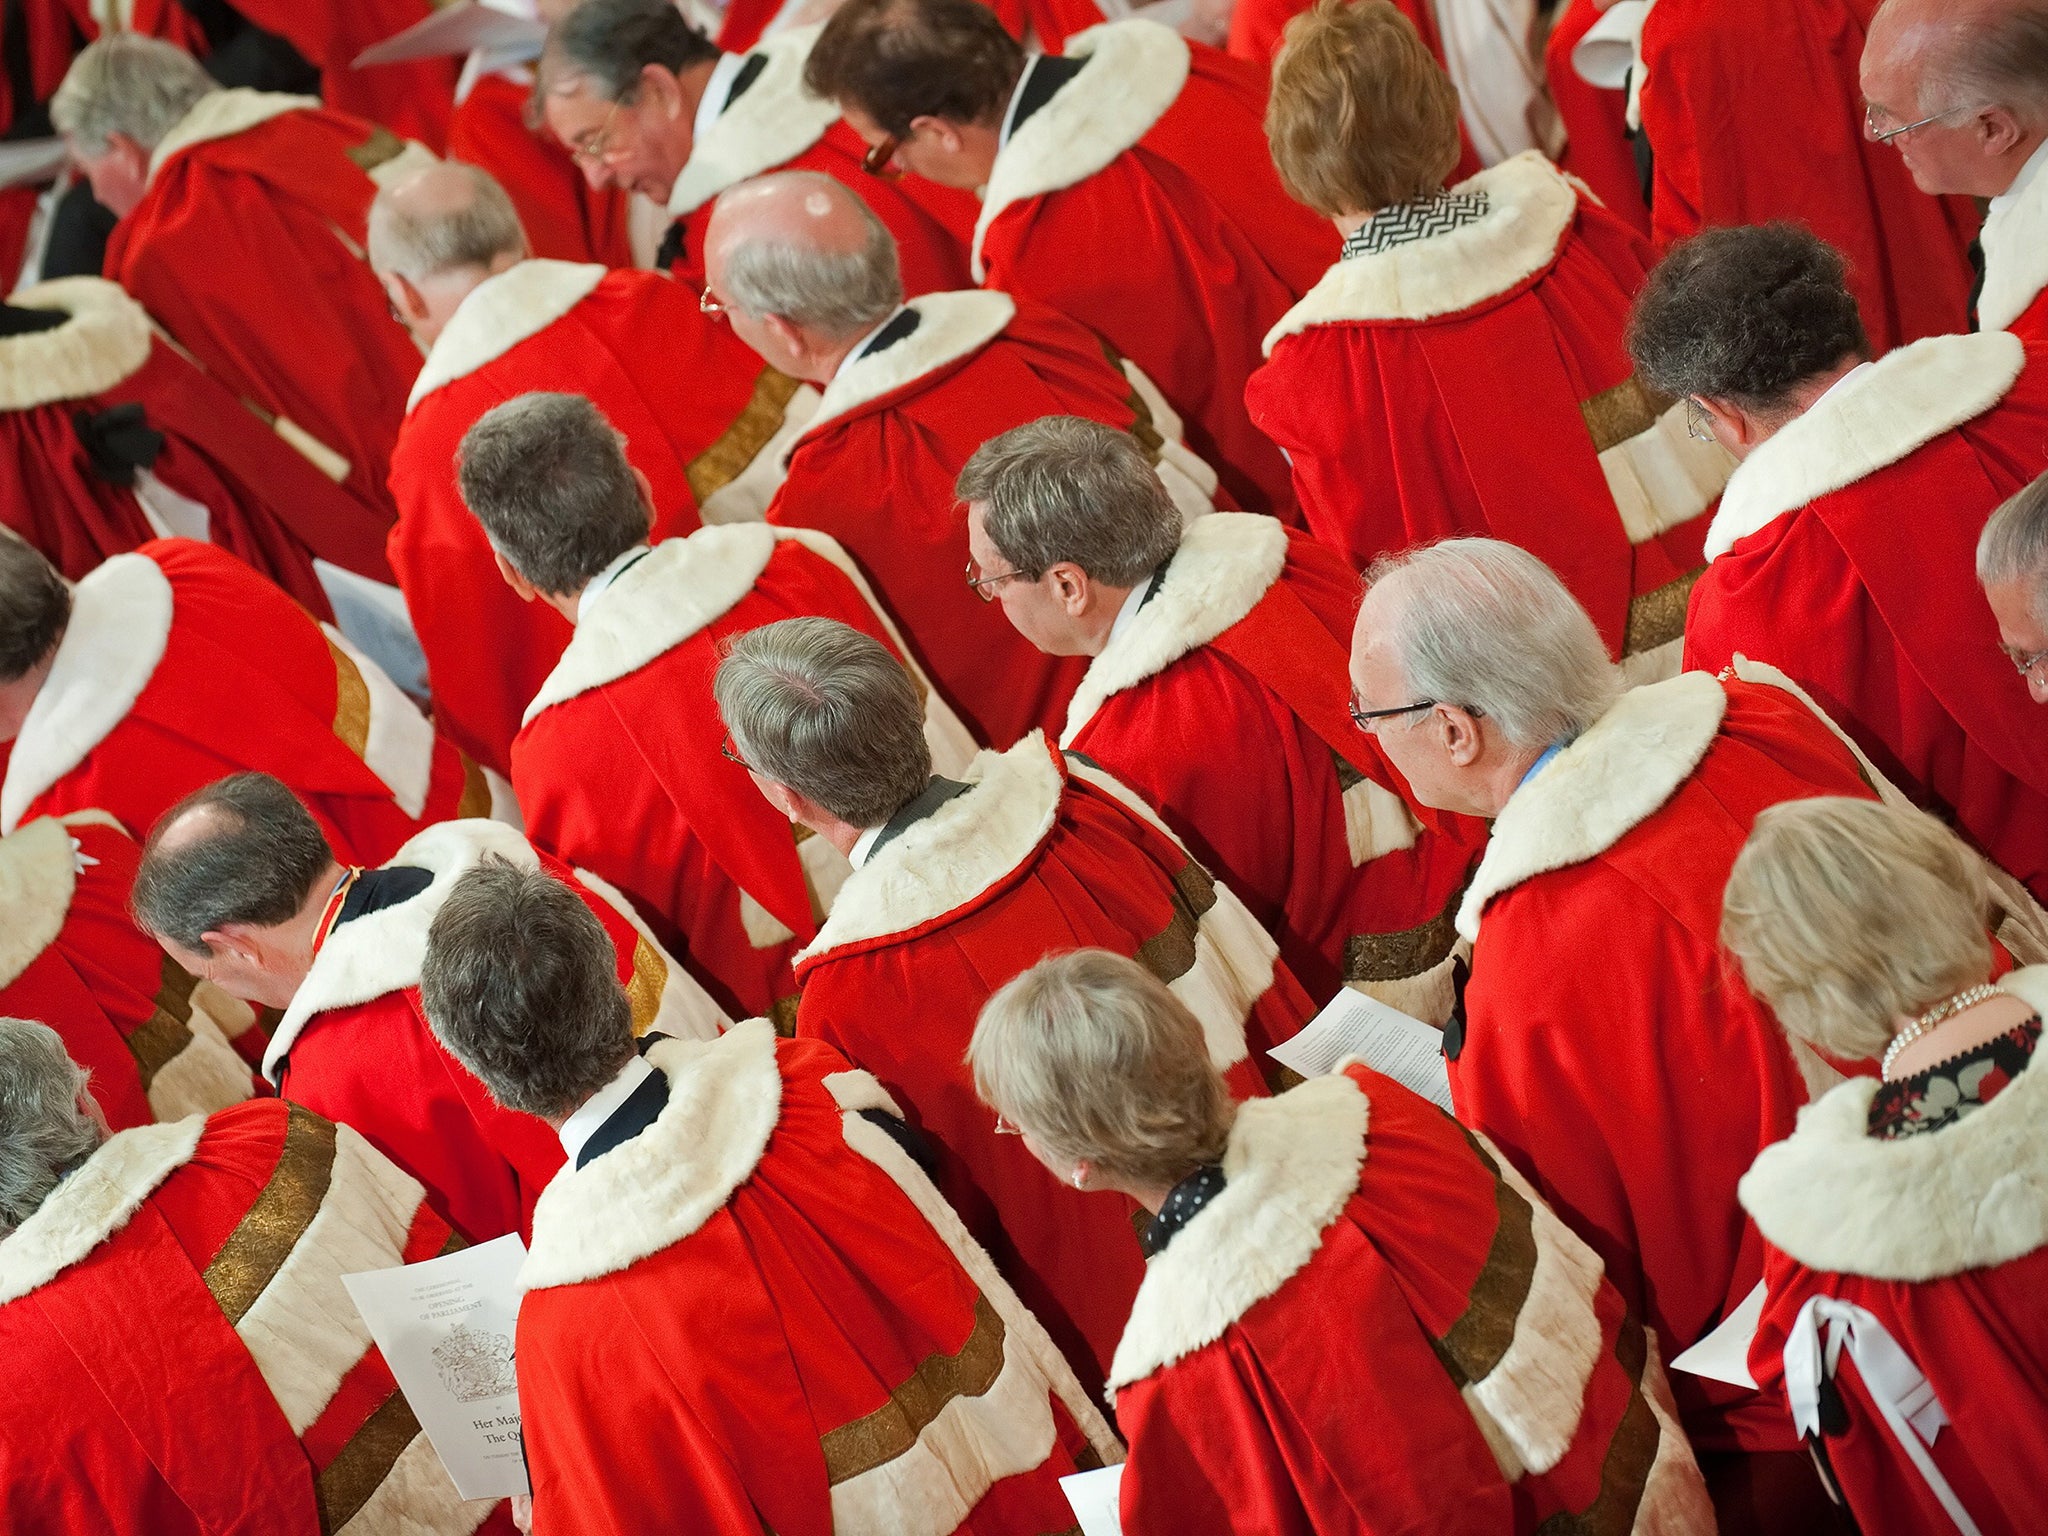 A number of the signatories are Conservative peers, enobled by David Cameron